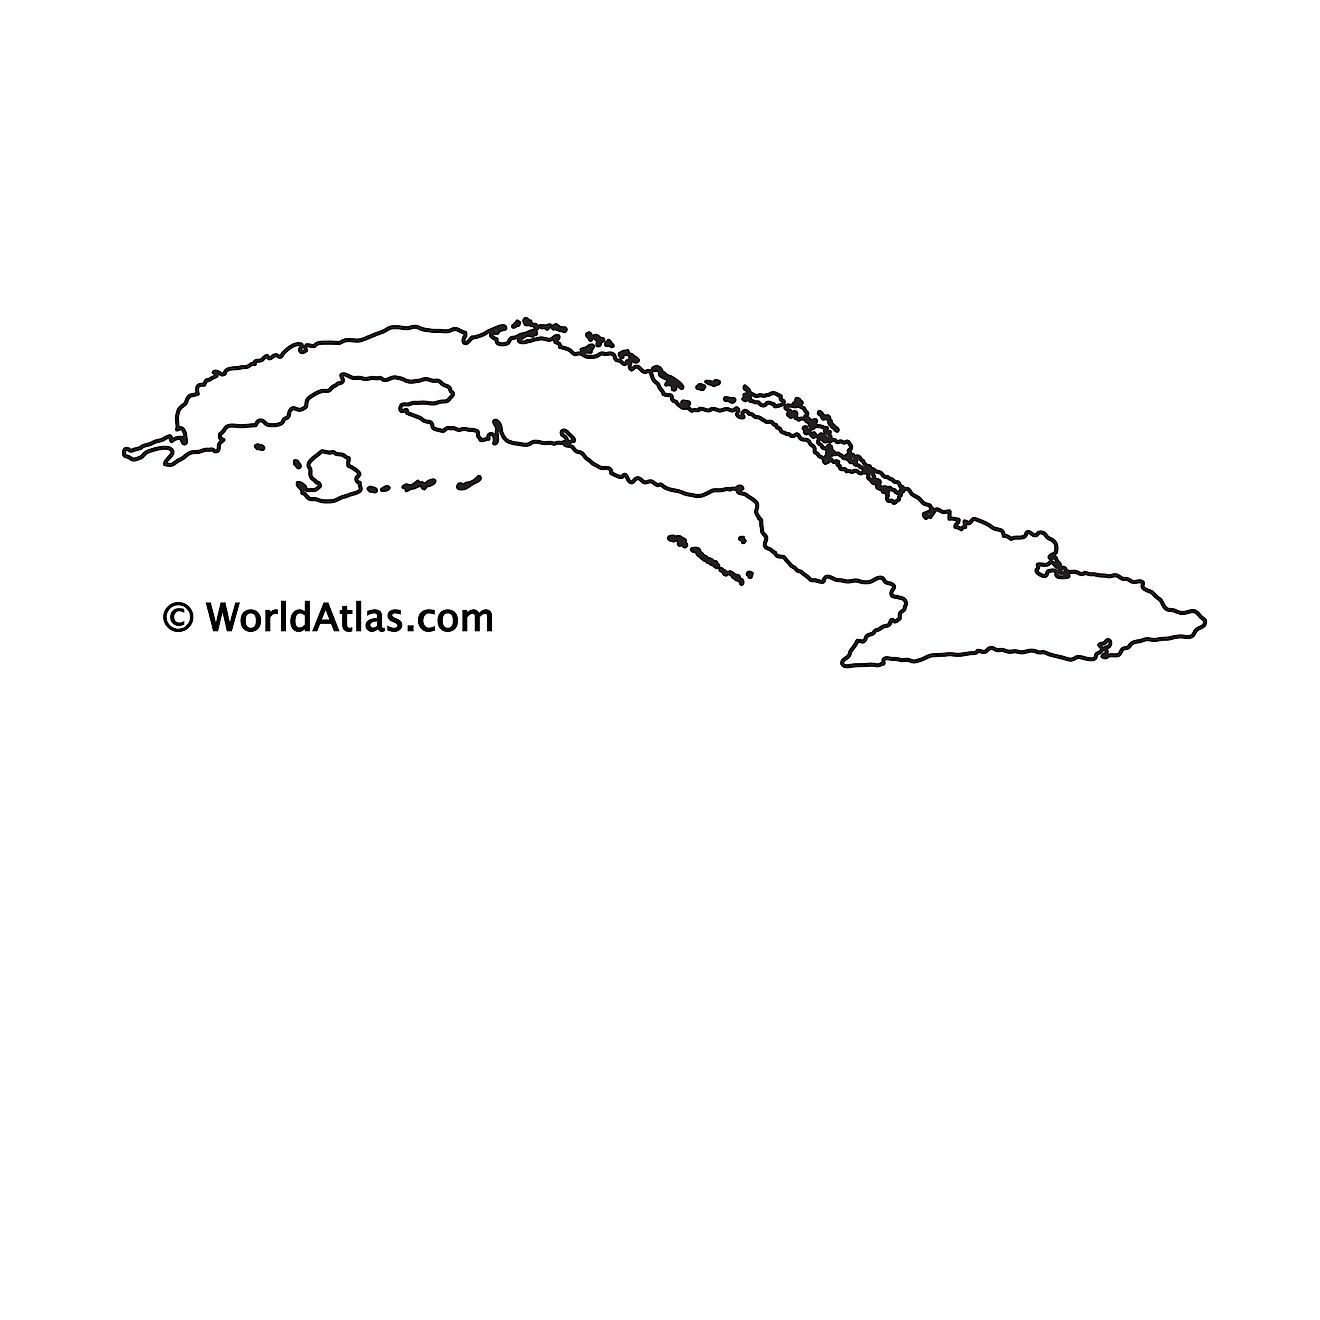 Blank Outline Map of Cuba